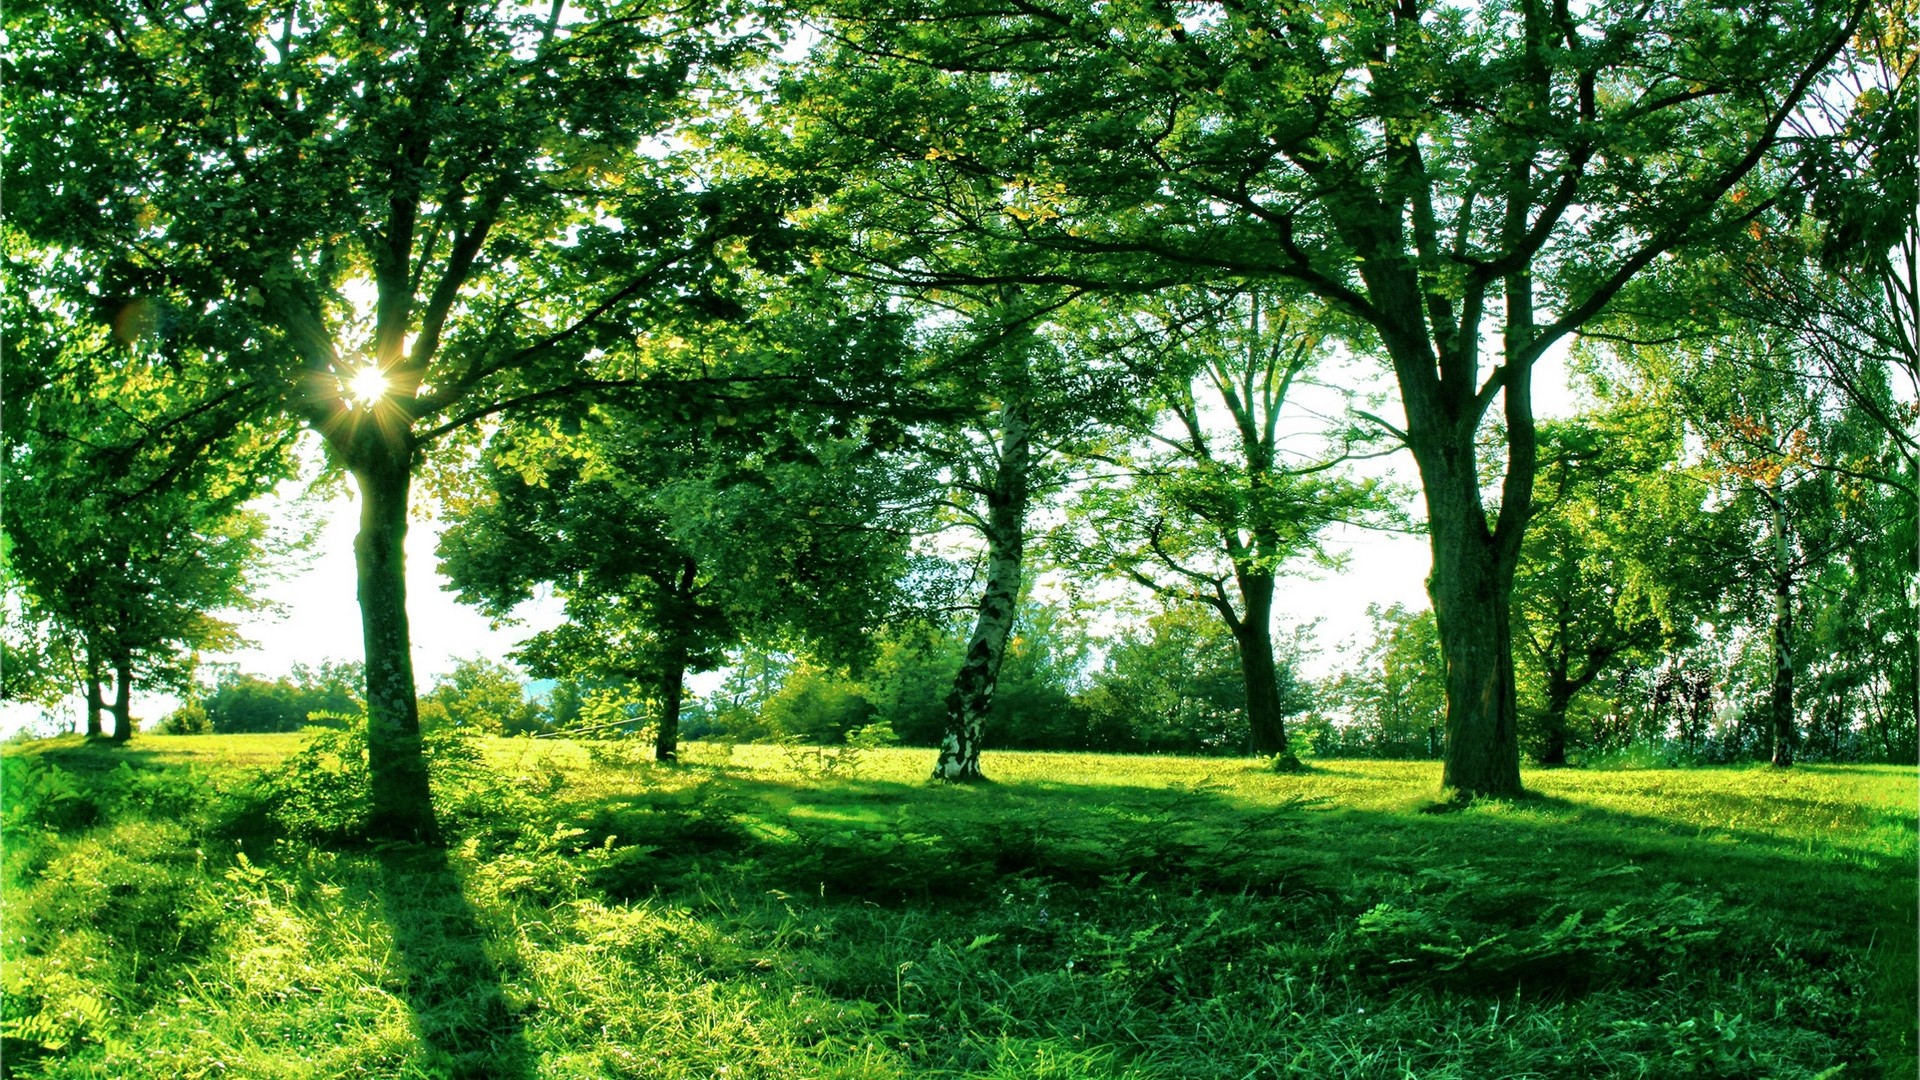 1920x1080 wallpapers: sun, light, trees, branches, alley, green, grass, summer, fast (image)